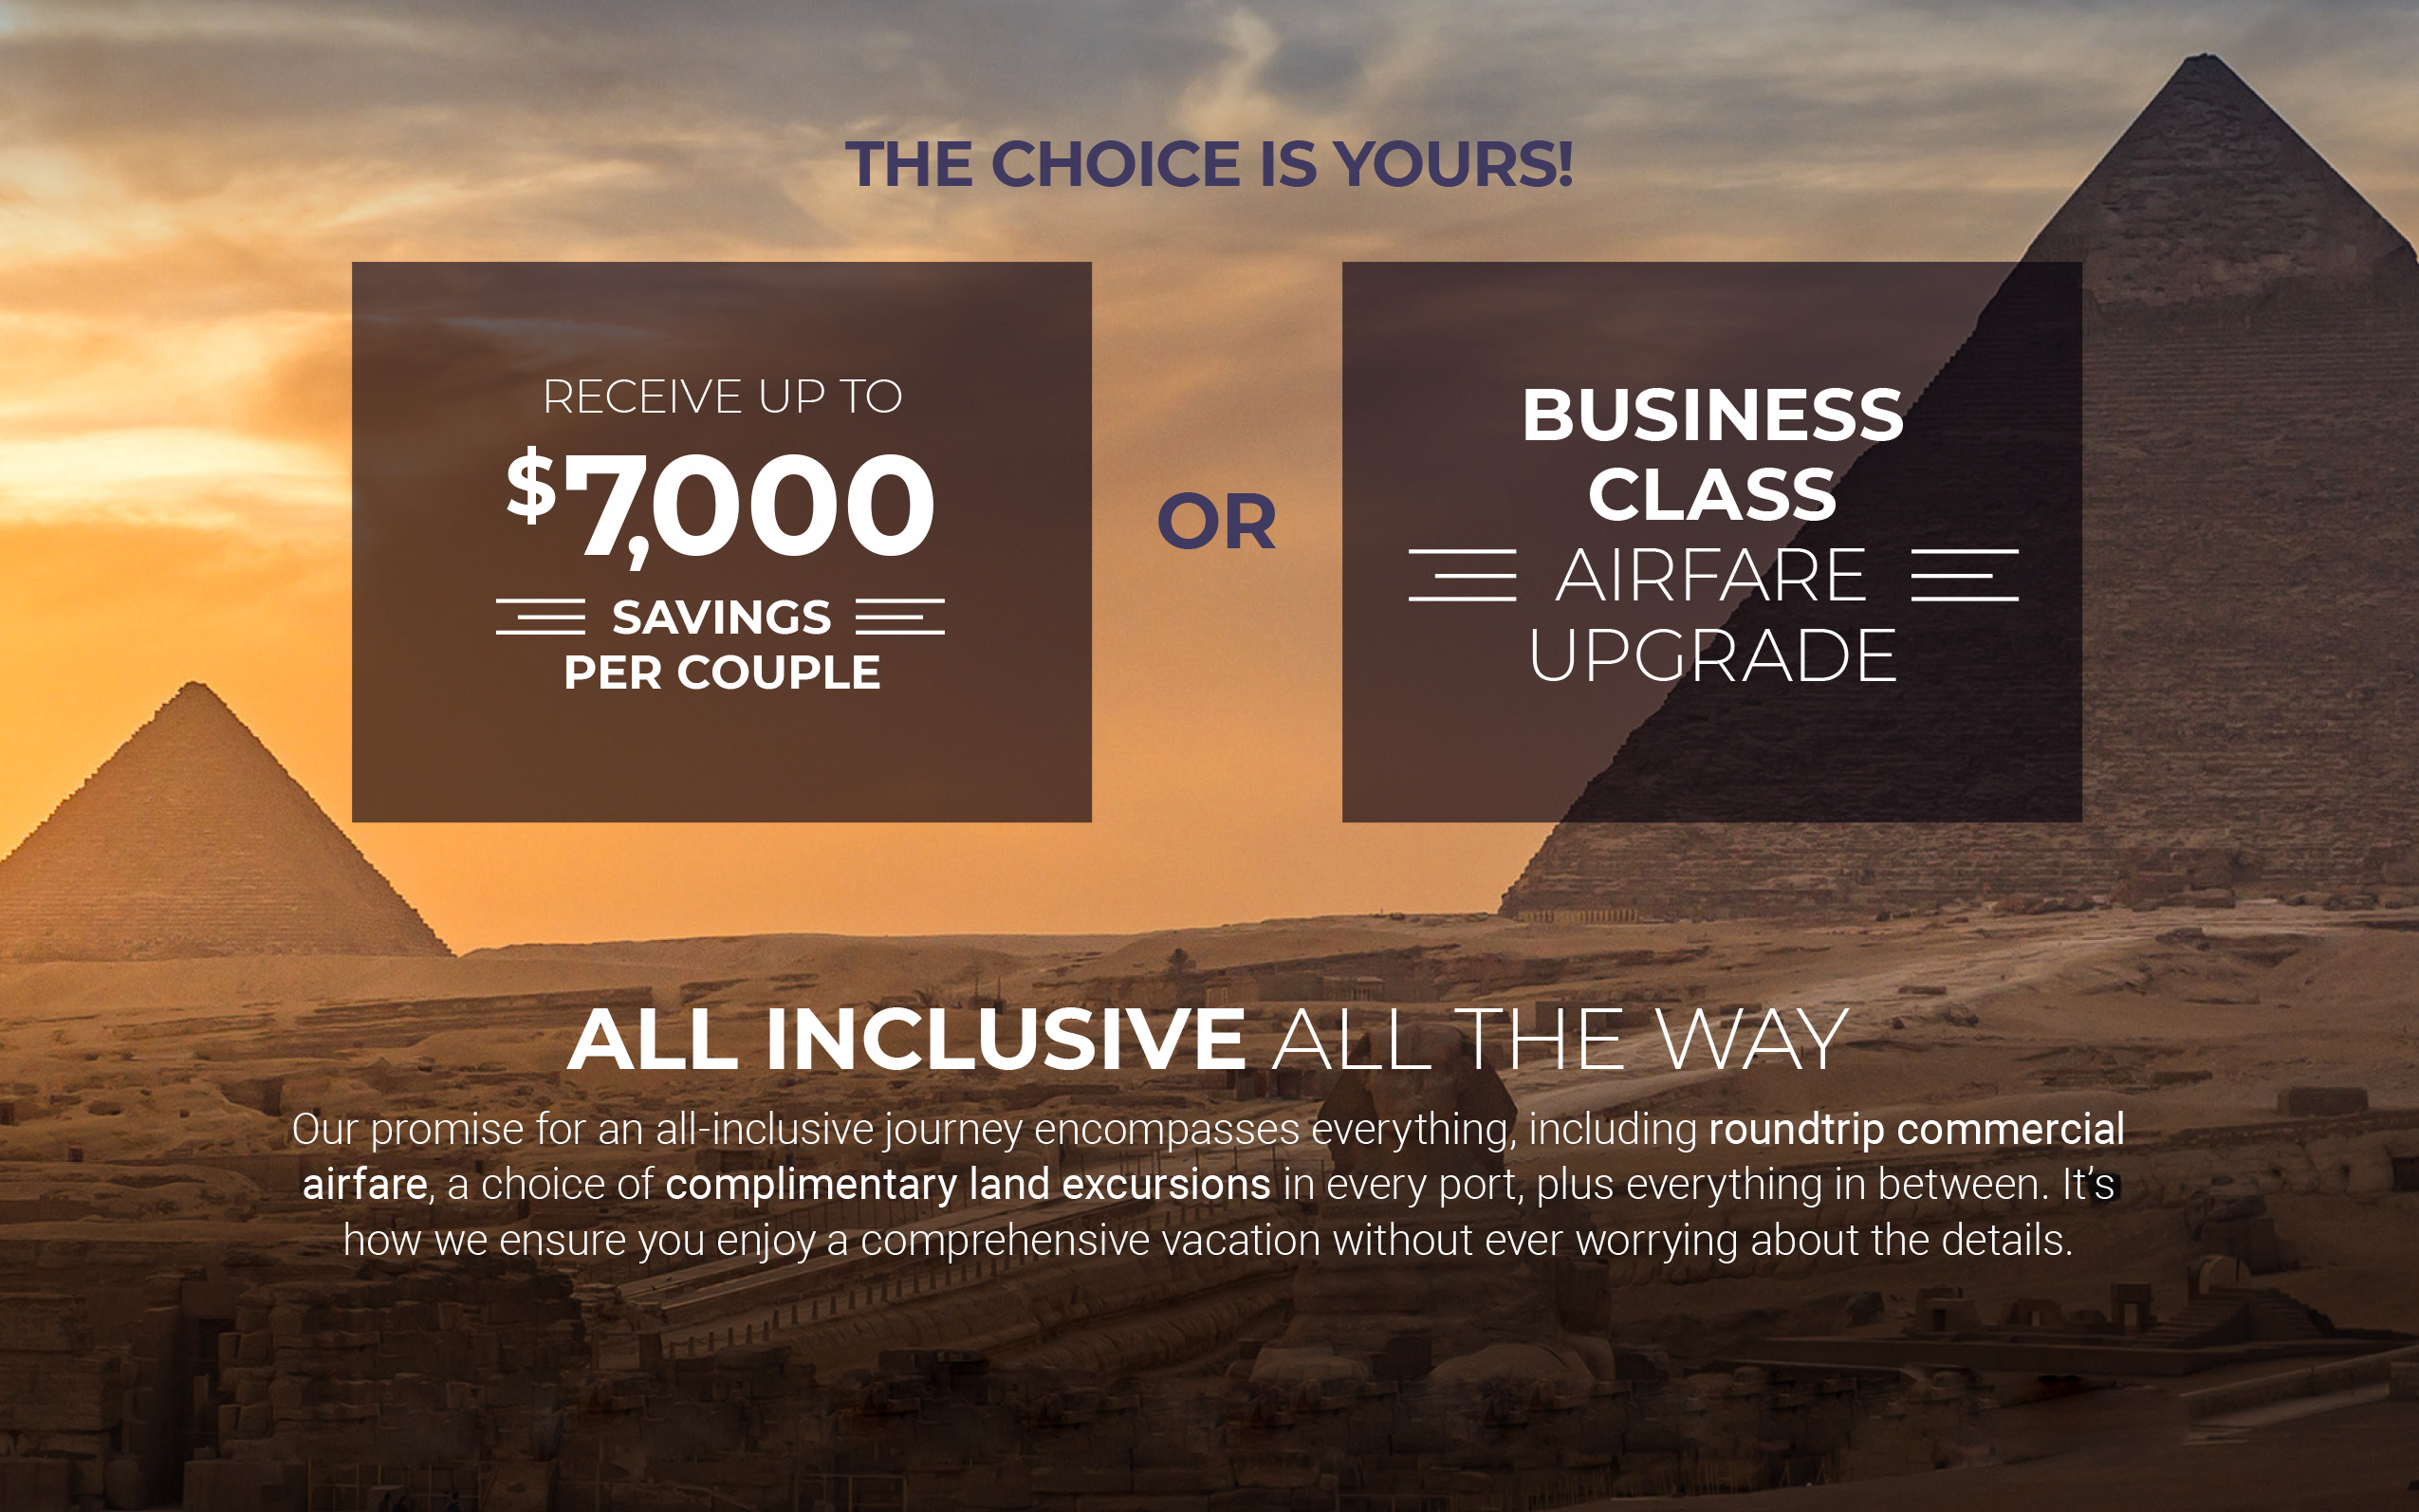 Enjoy up to $7,000 savings per couple or Business Class Upgrade with Atlas Voyages